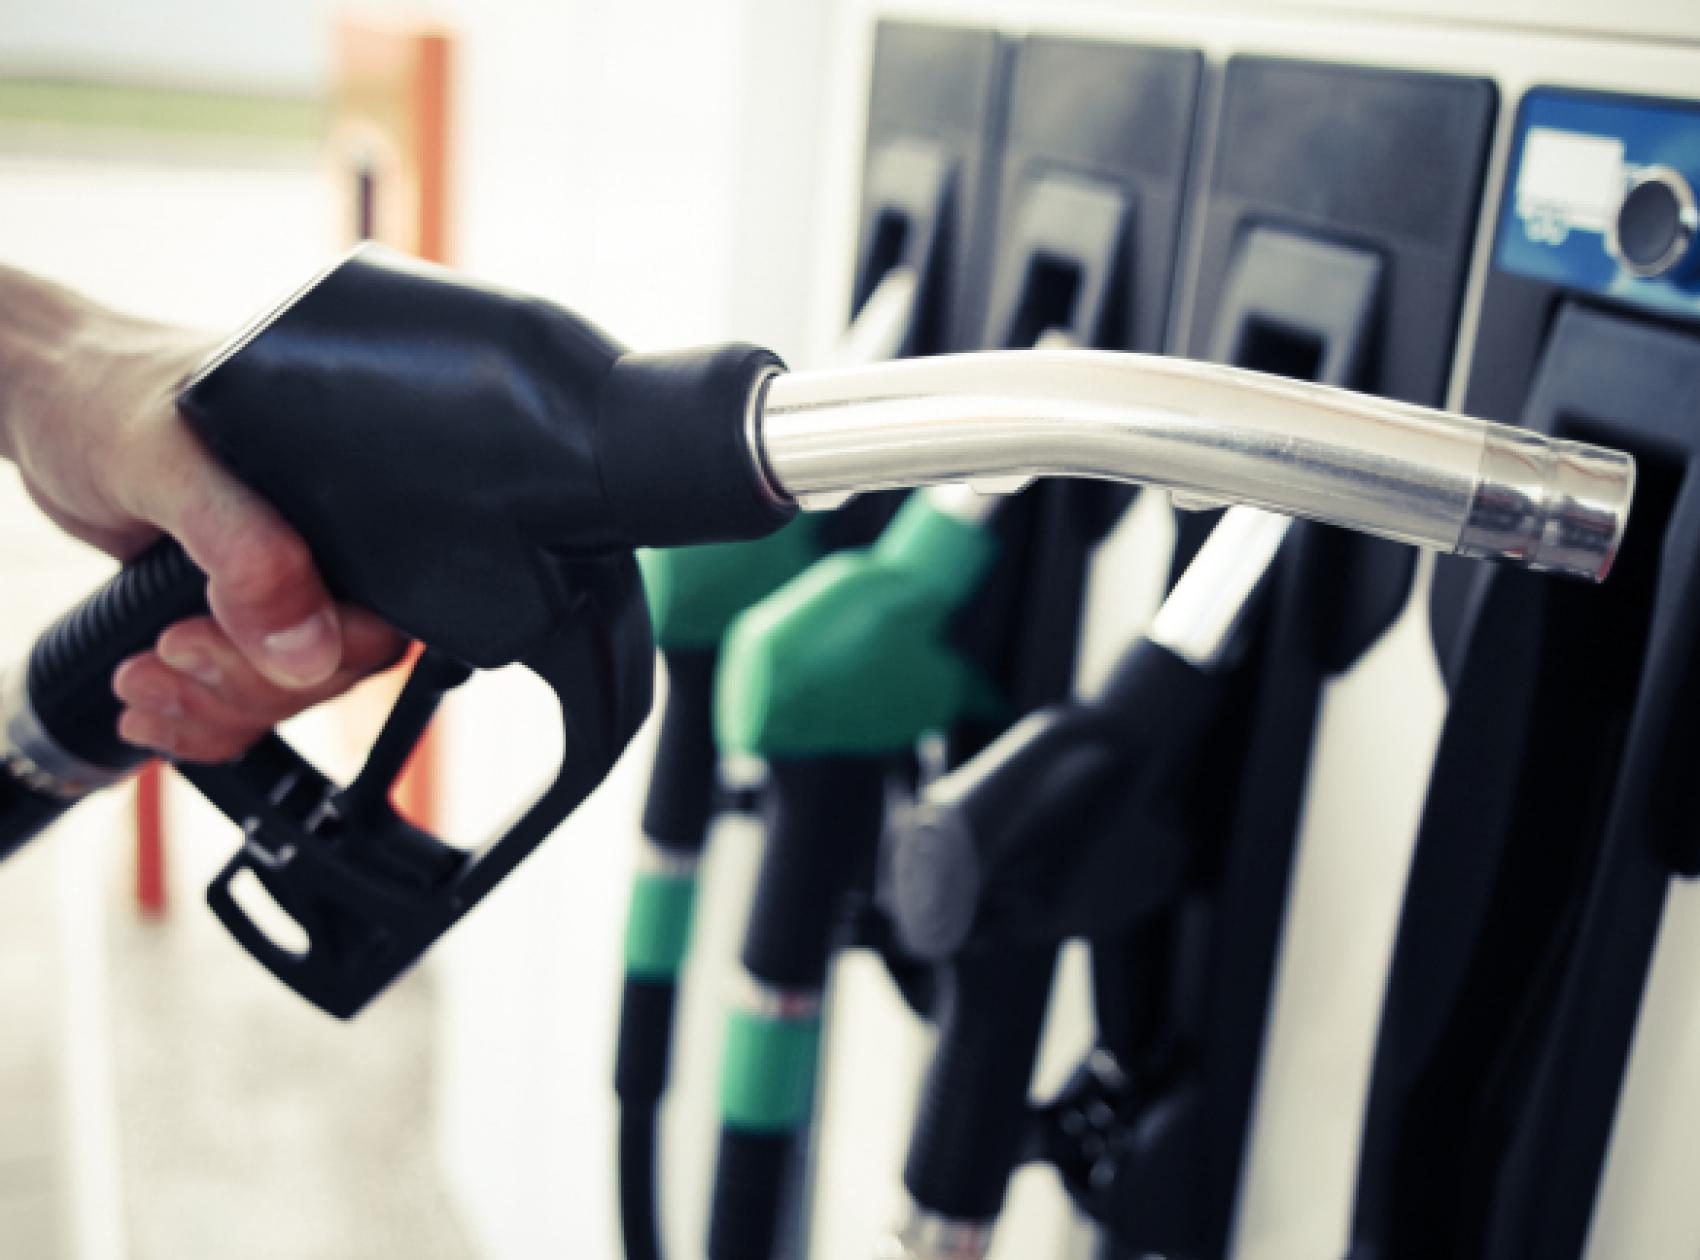 In one year, the price of gasoline at gas stations